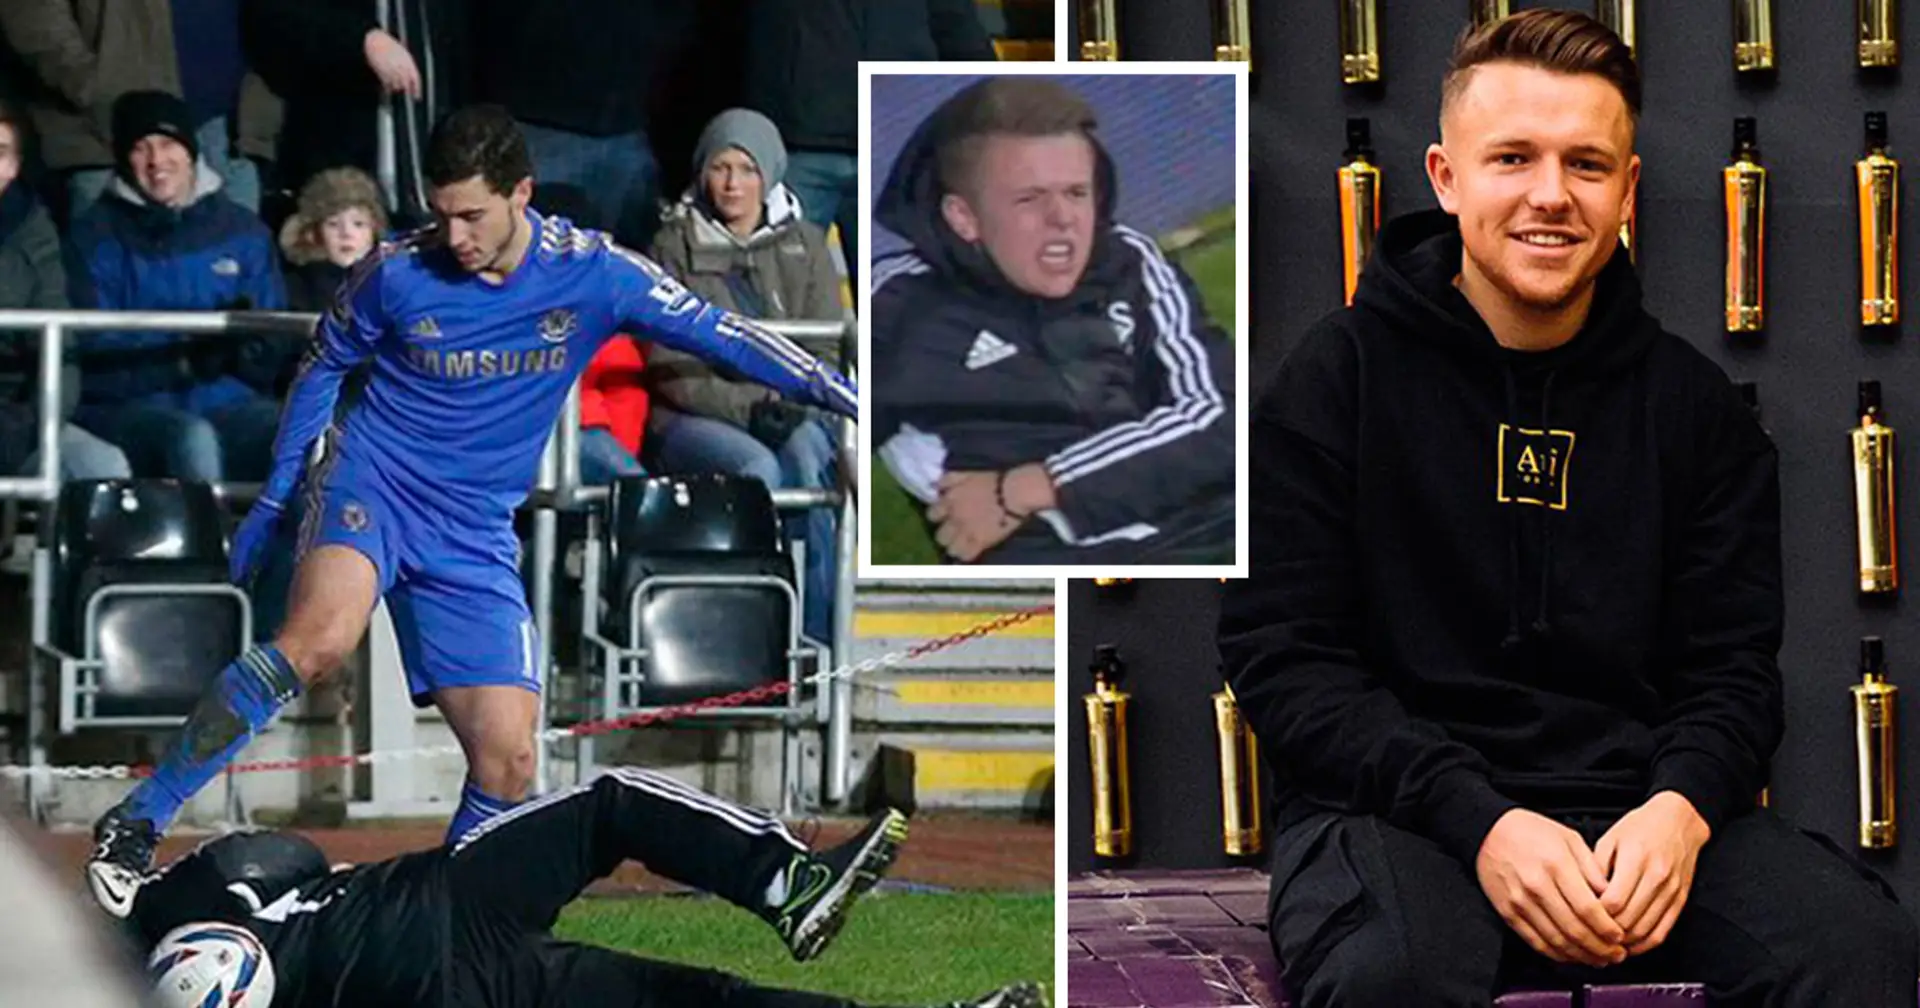 Charlie Morgan, the Swansea ball boy who was infamously kicked by Eden Hazard, is now a multi-millionaire